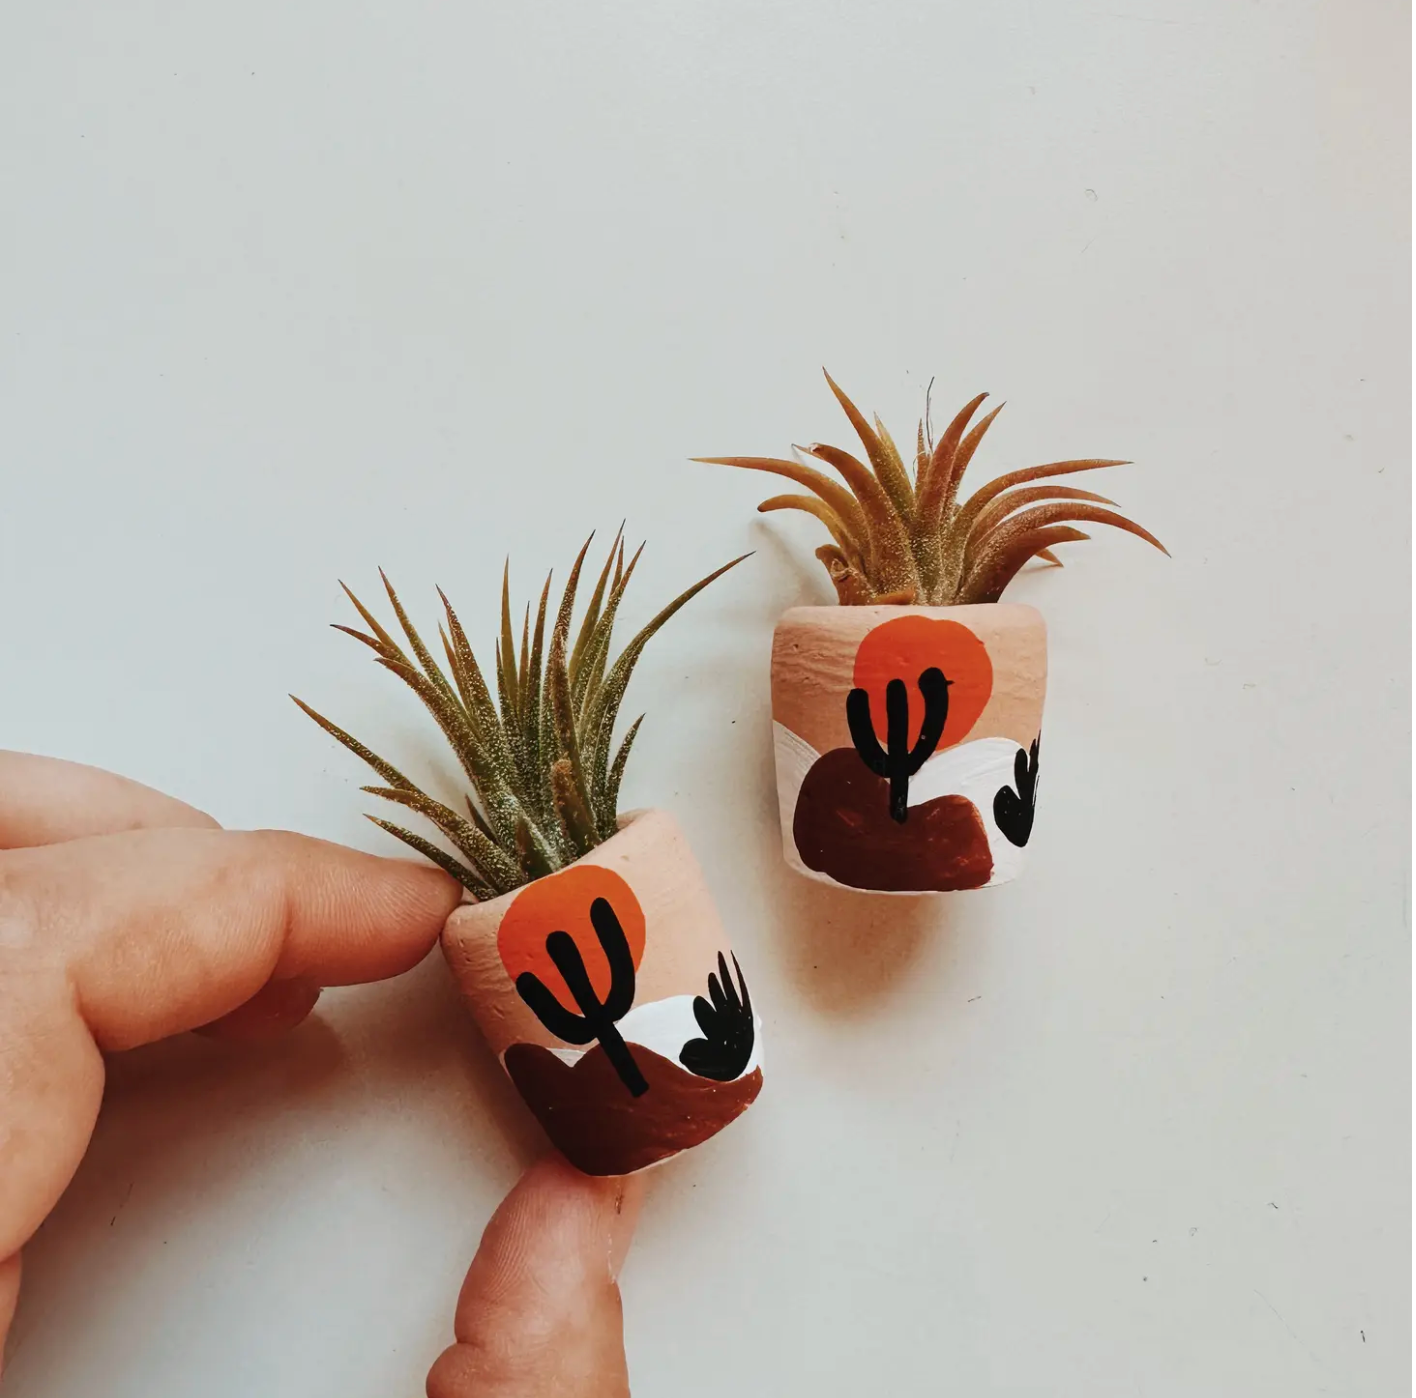 A cute, handmade mini planter made for air plants or succulents.   - handmade with concrete & hand painted. Includes airplant.